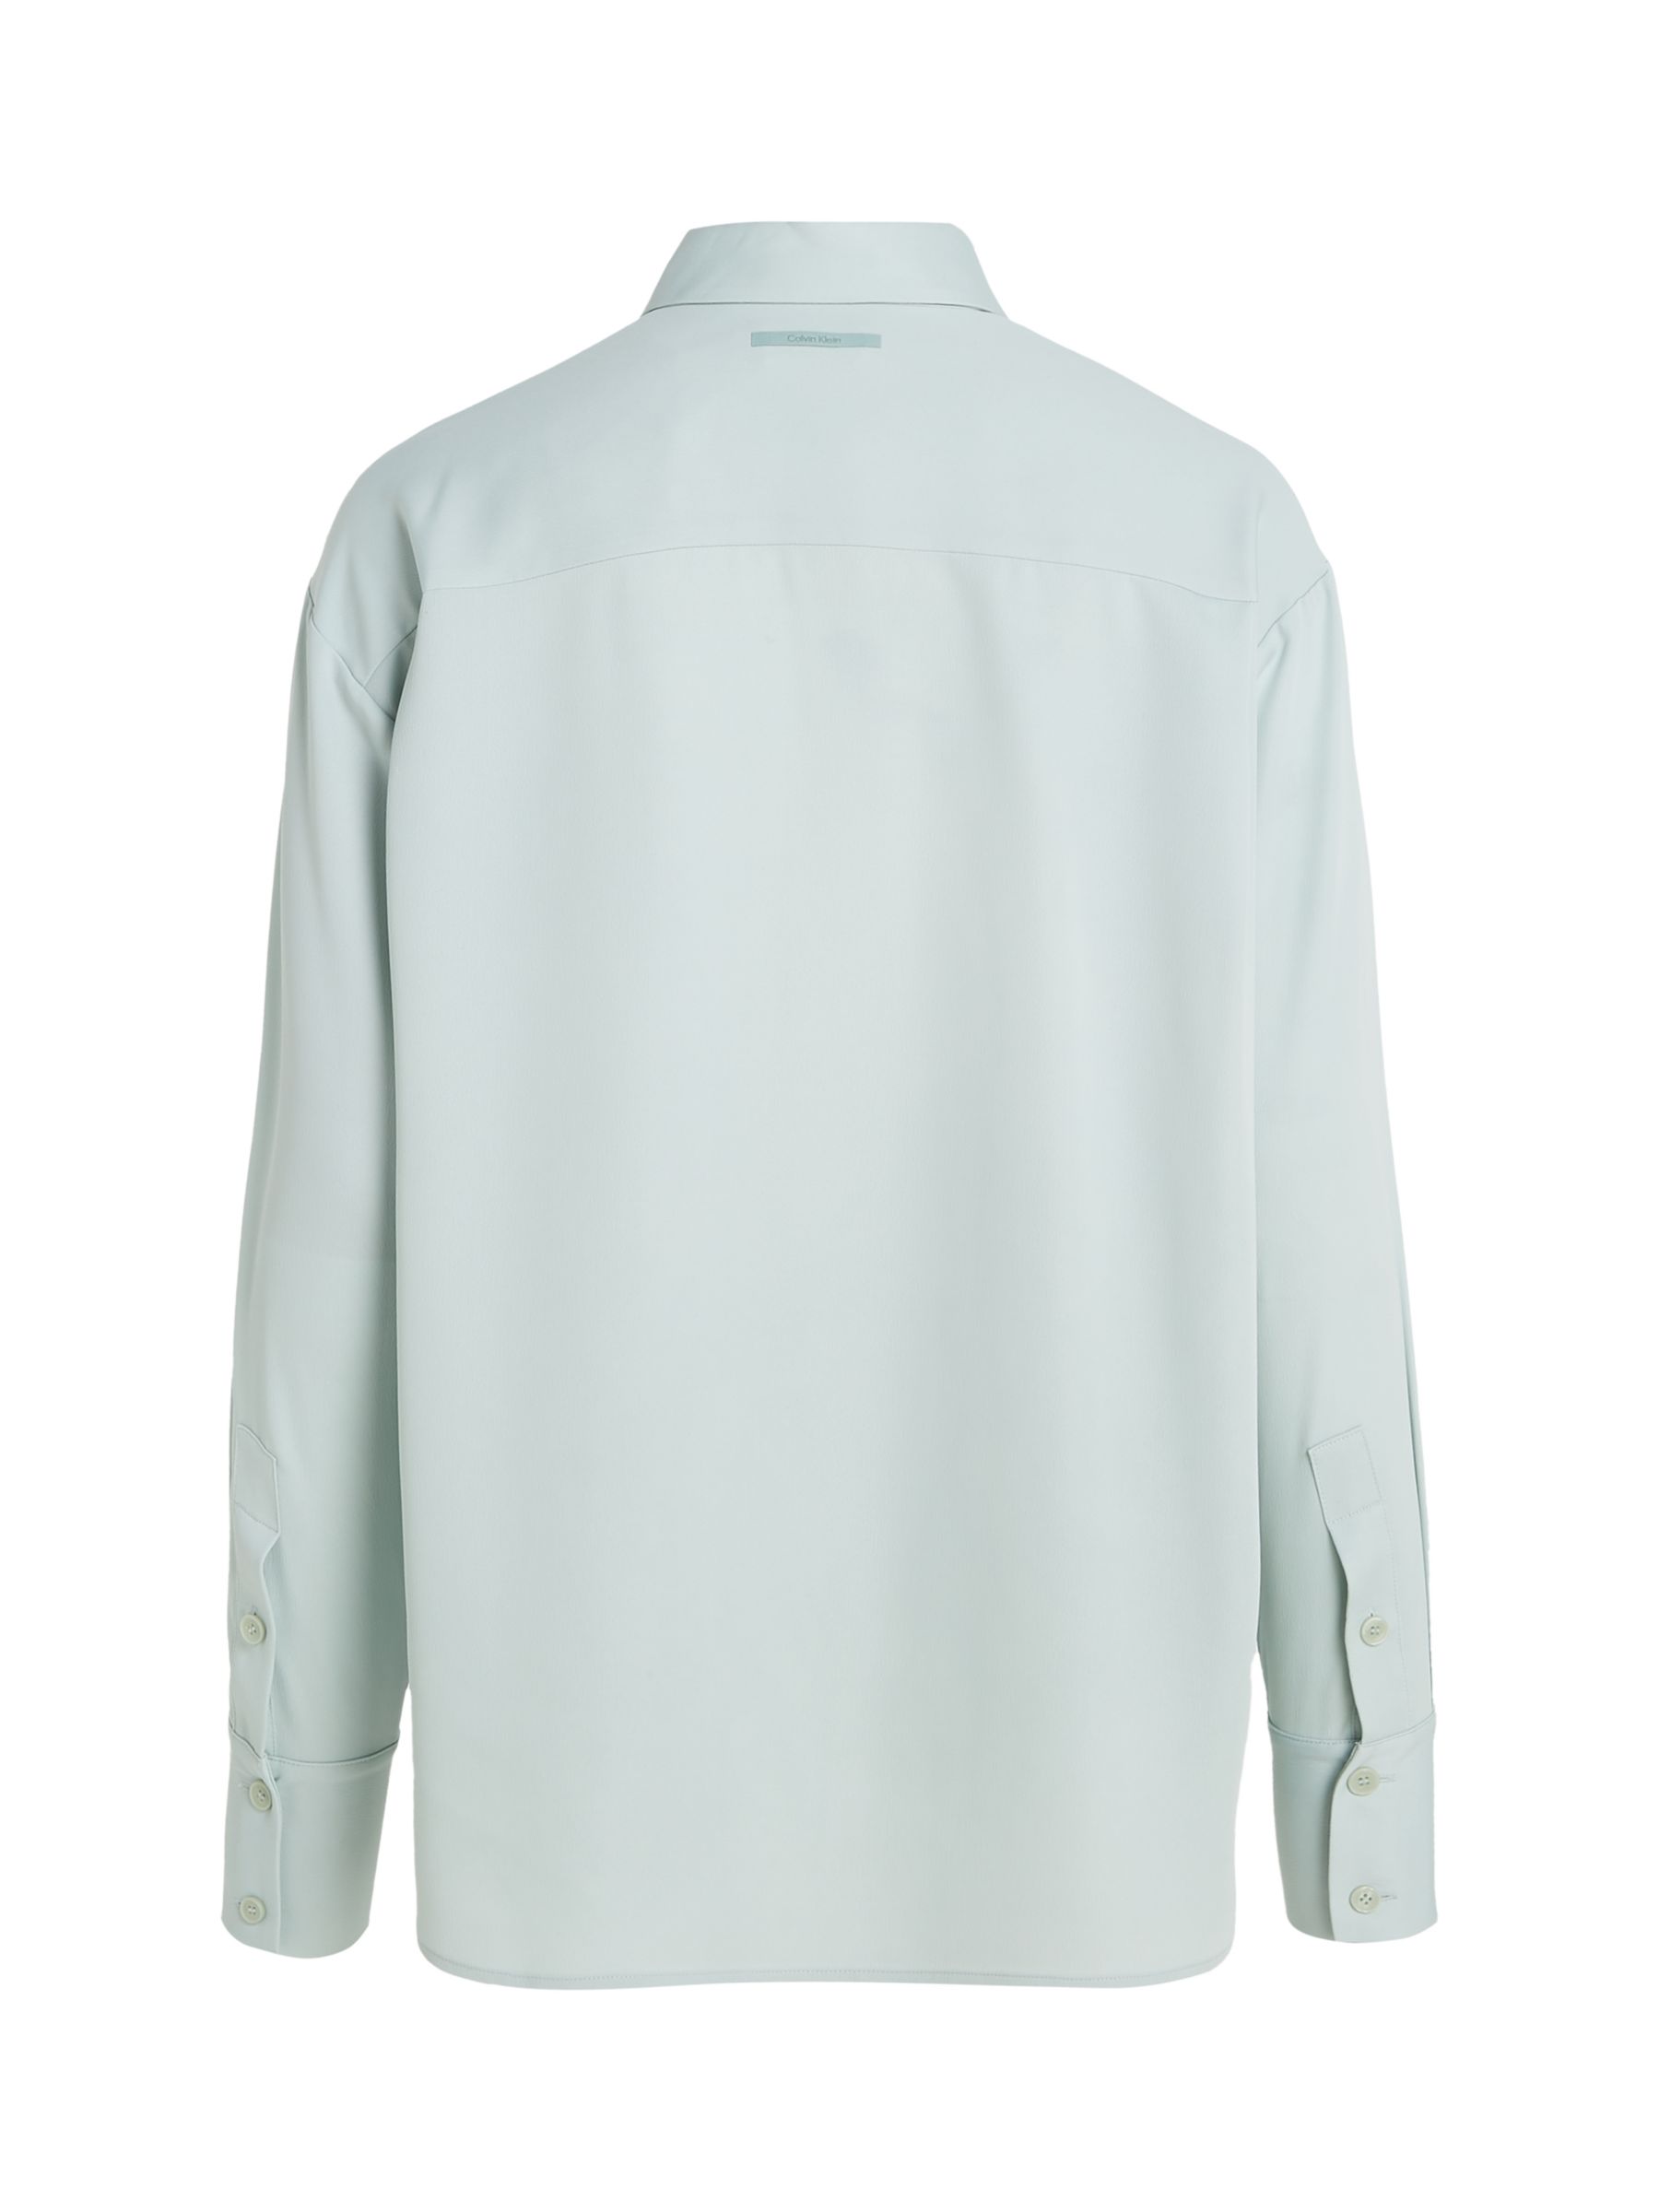 Buy Calvin Klein Recycled Relaxed Shirt, Morning Frost Online at johnlewis.com